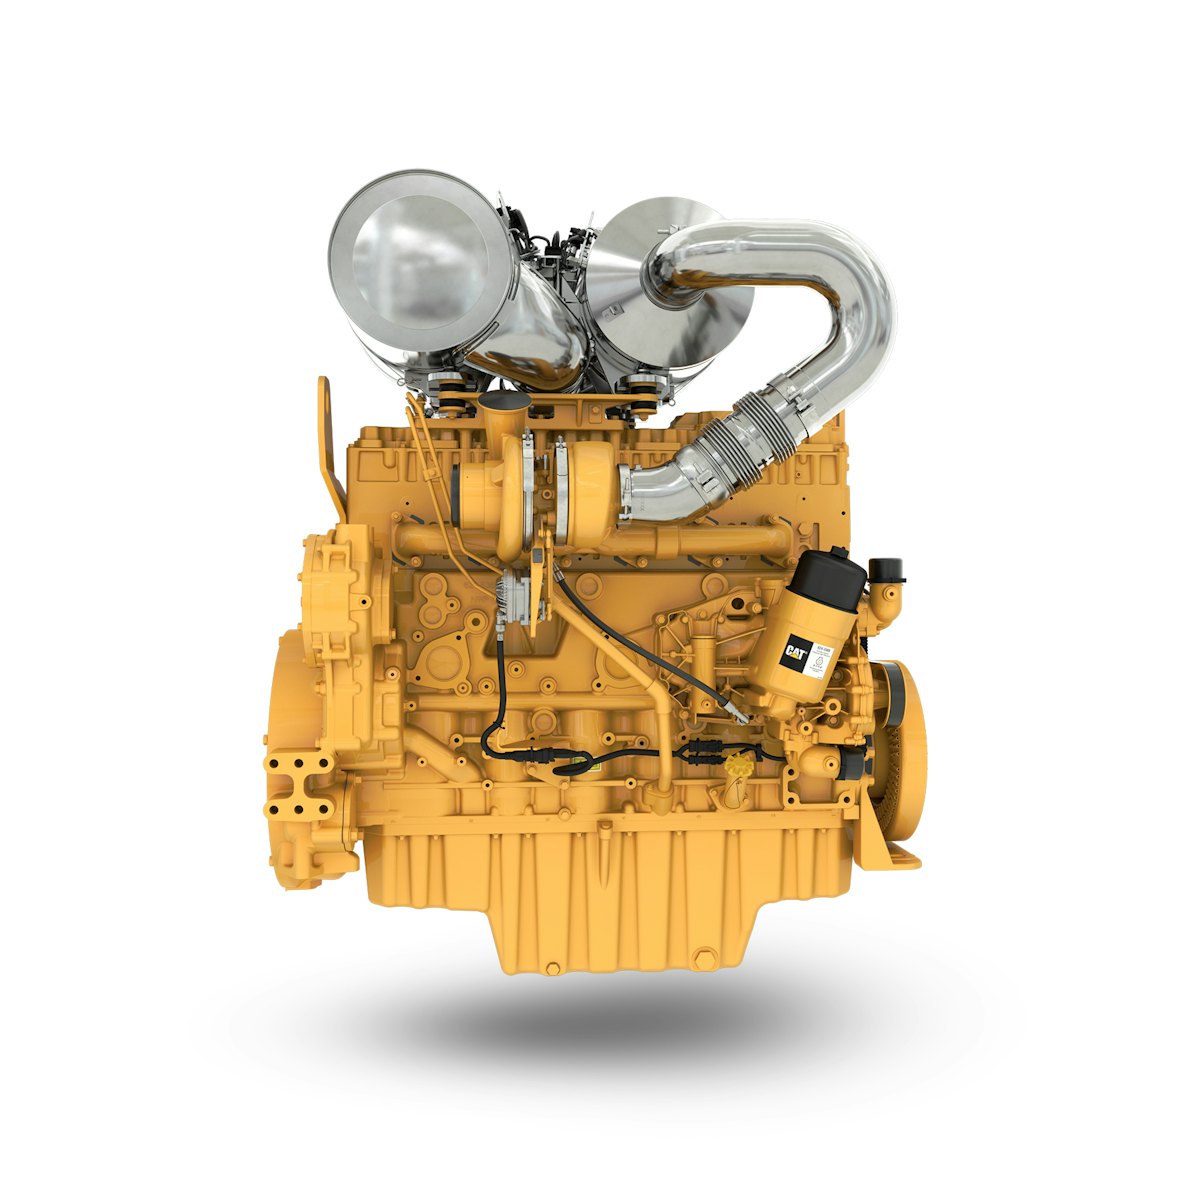 Caterpillar Car and Truck Complete Engines for sale